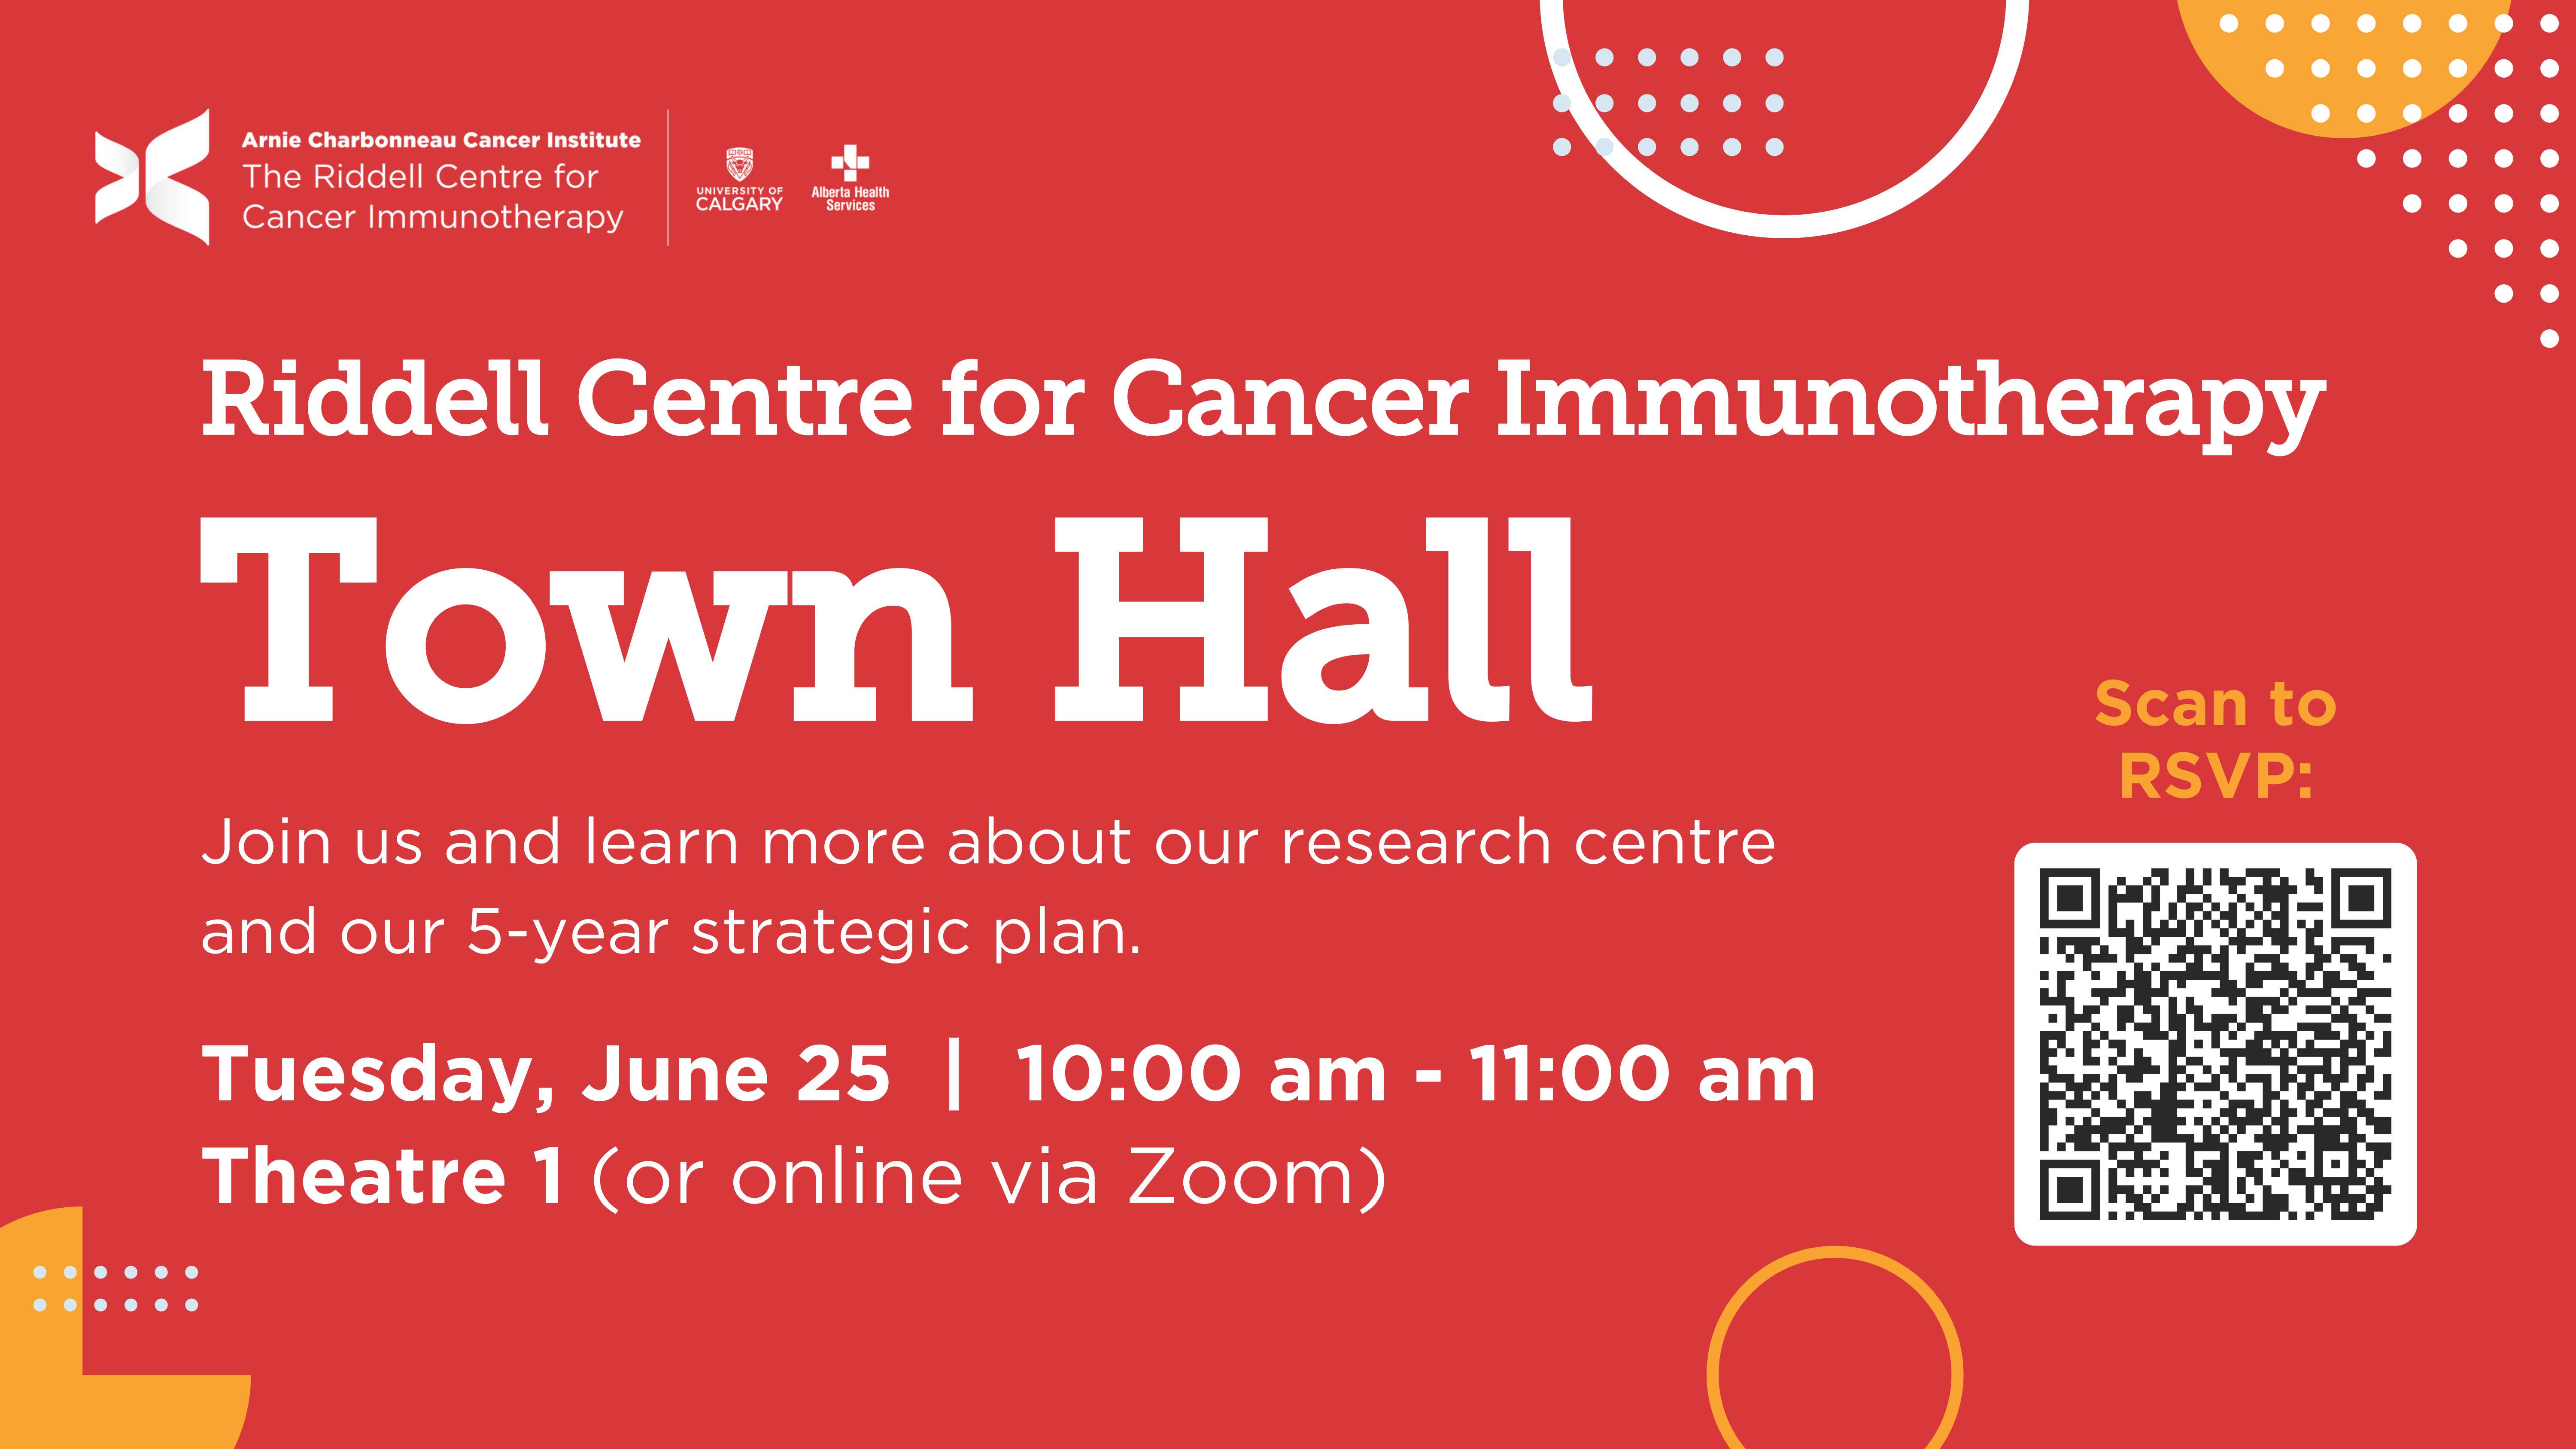 Charbonneau Riddell Centre for Cancer Immunotherapy Town Hall June 25.jpg